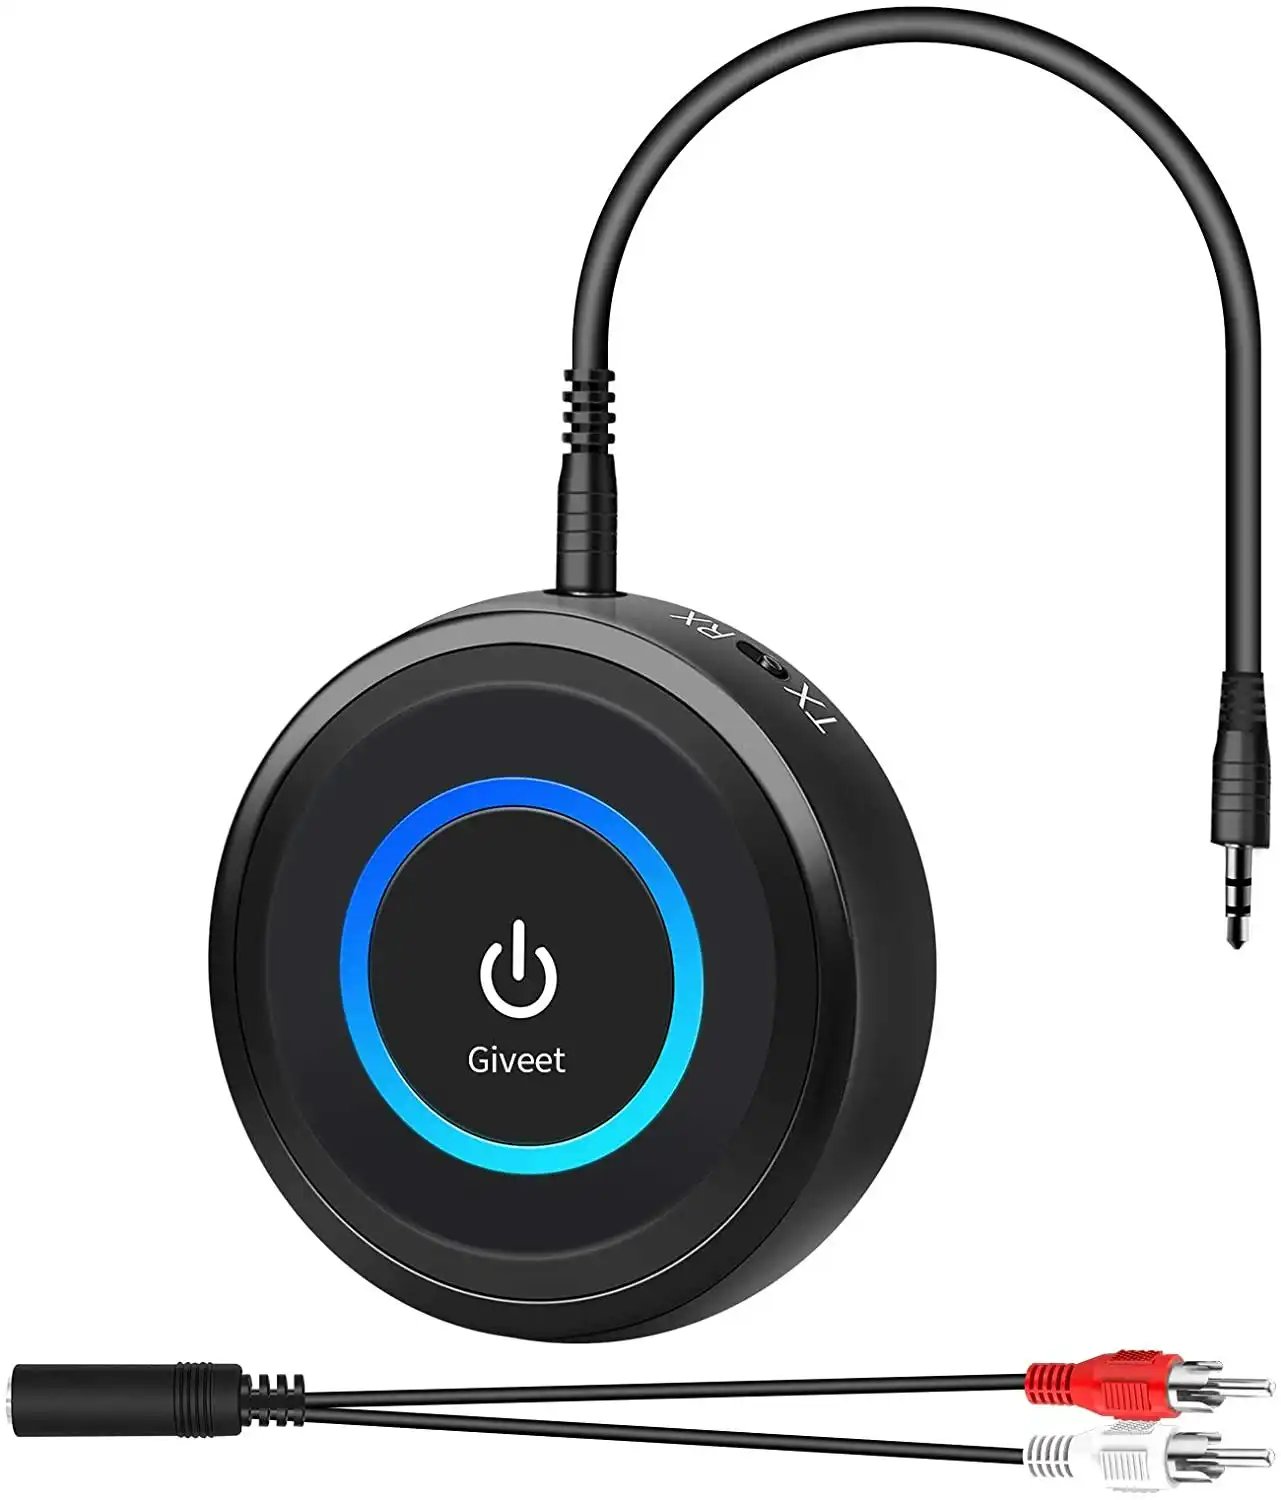 Giveet Bluetooth 5.0 Transmitter Receiver for TV, Upgraded aptX LL/FS 40ms Wireless Audio Adapter for Home Stereo PC Radio CD Music Stream, P